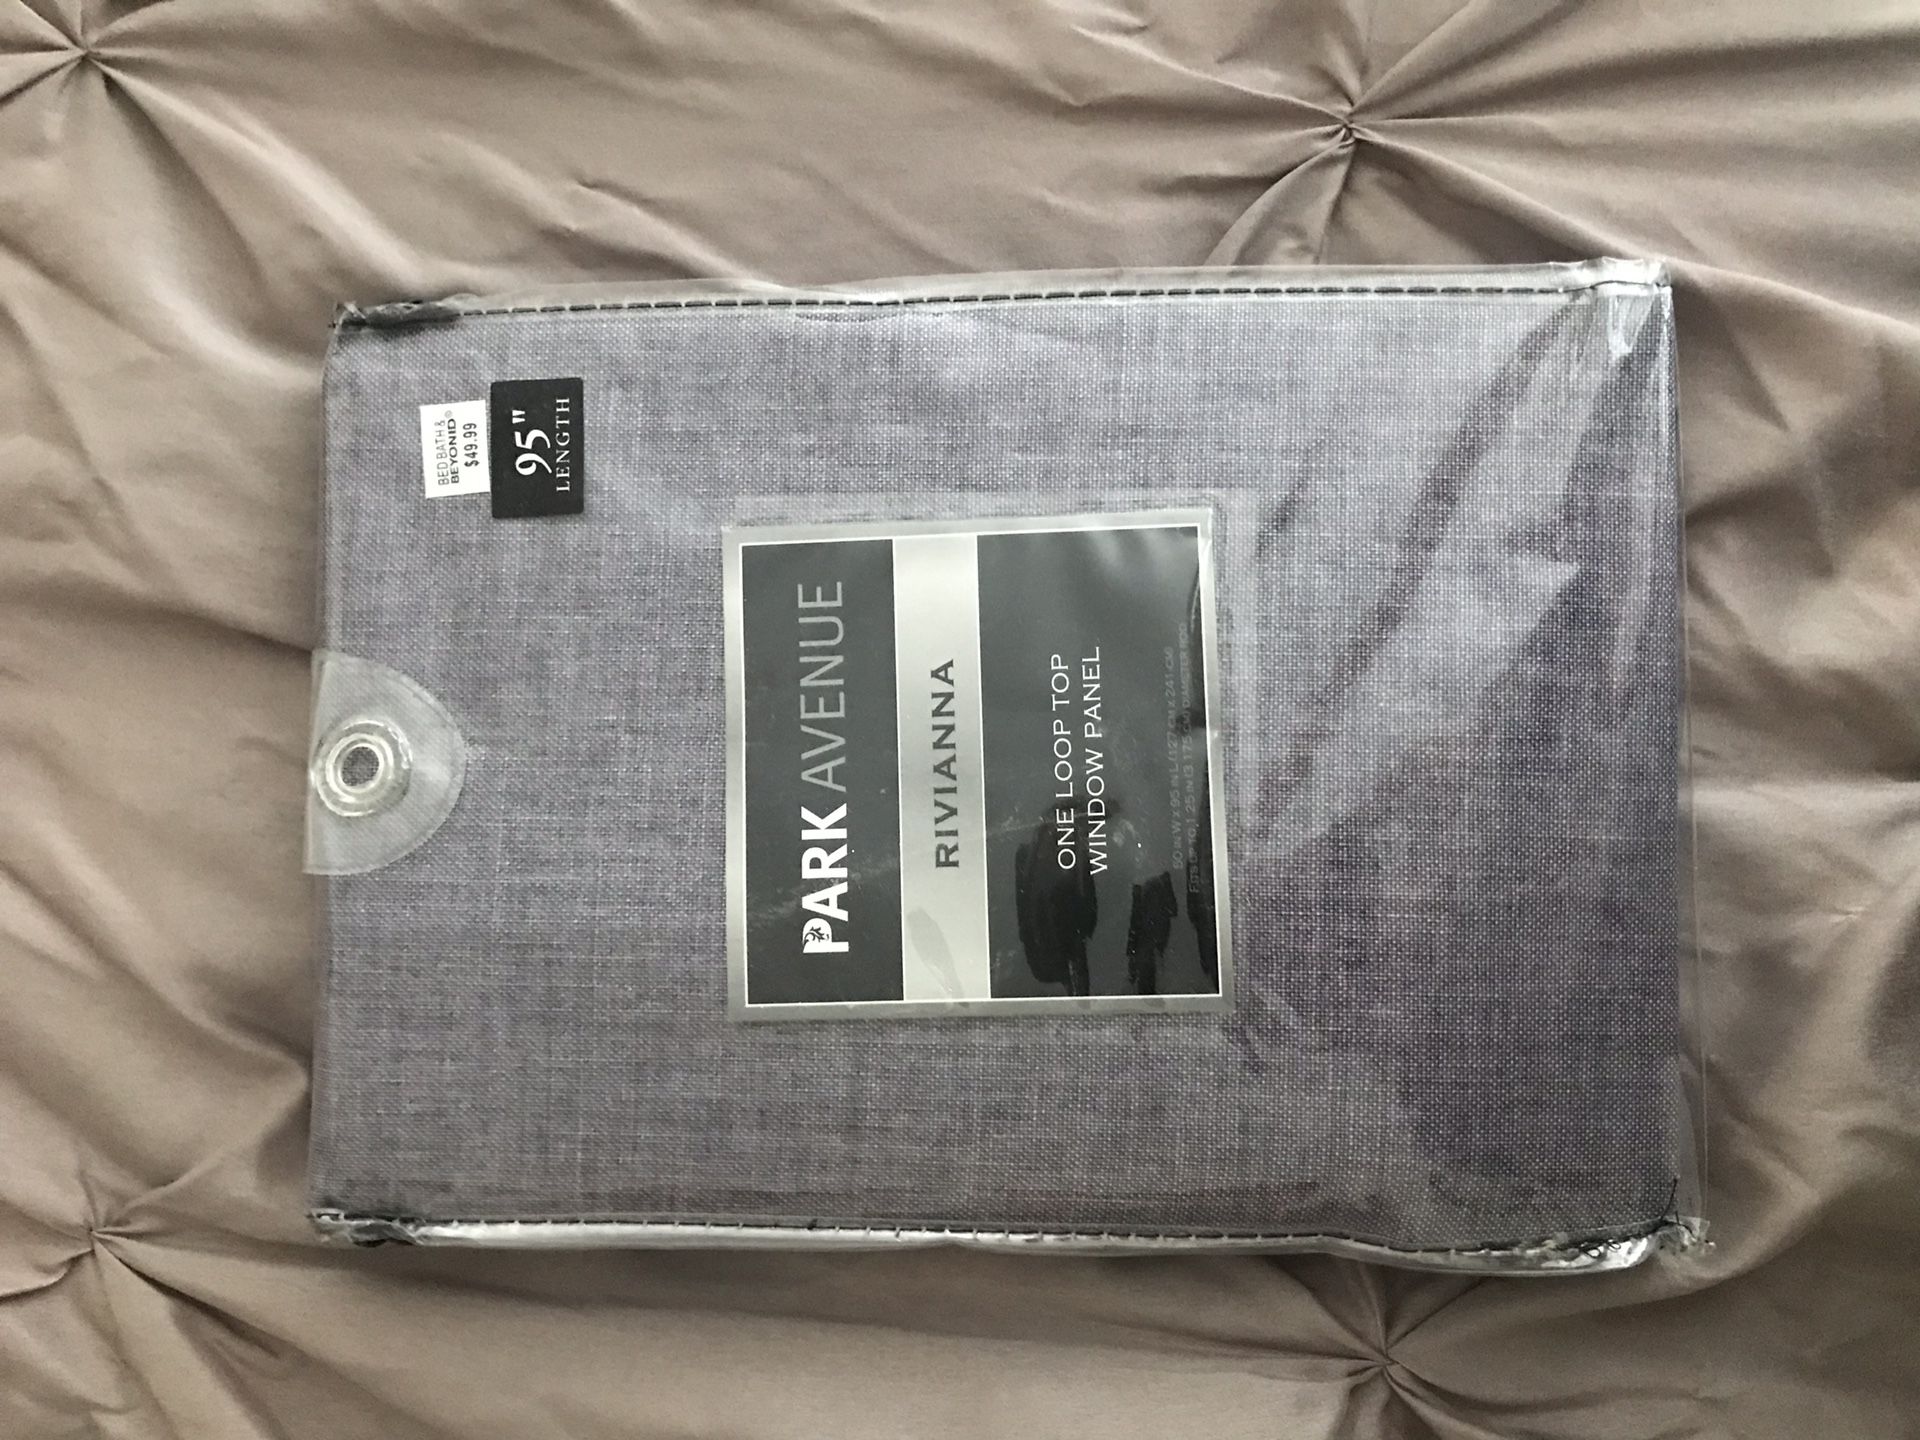 2 (Two) Packs of Park Avenue Rivianna Curtain Panels